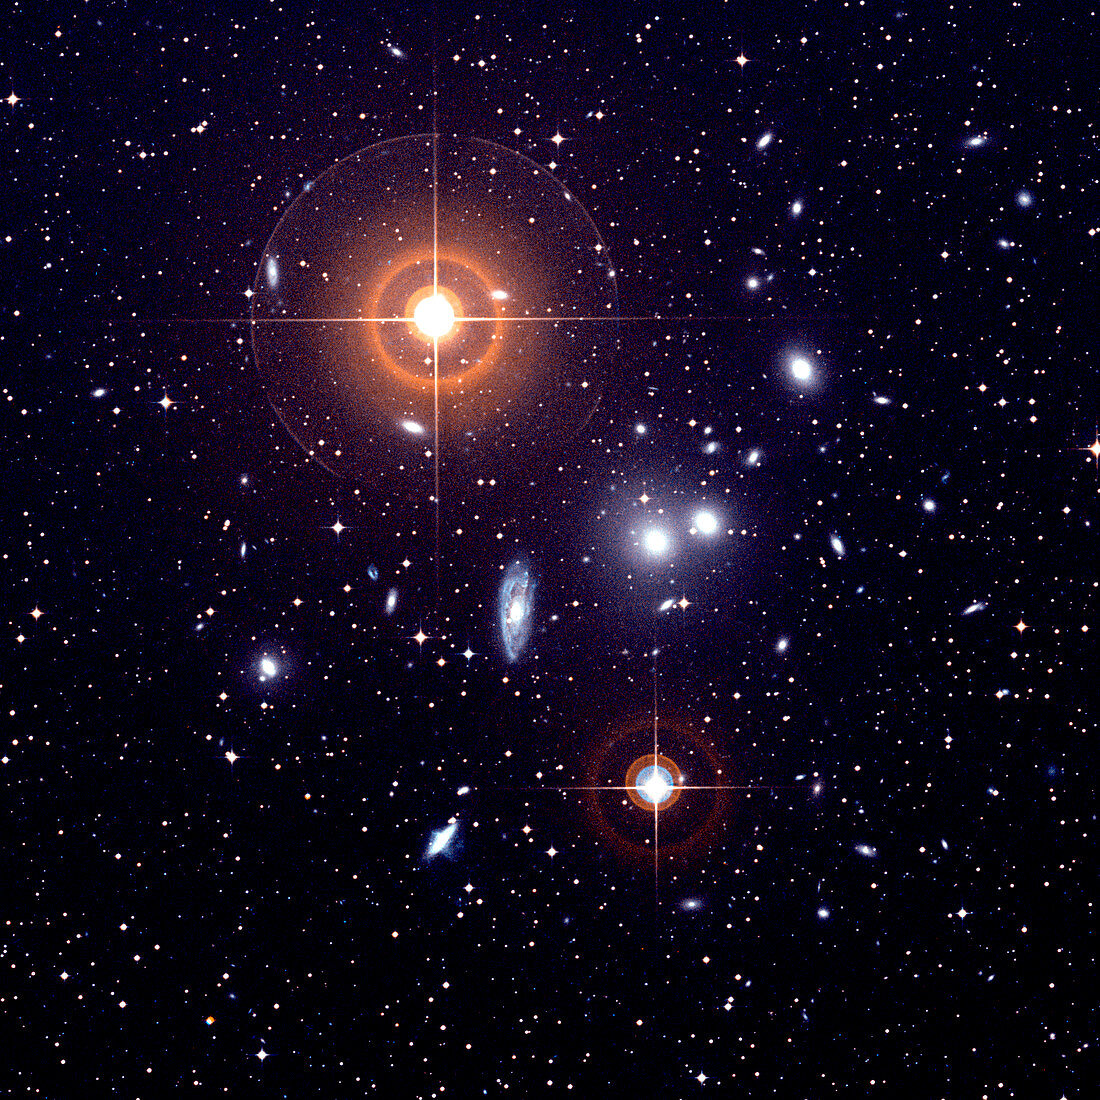 Abell 1060 galaxy cluster